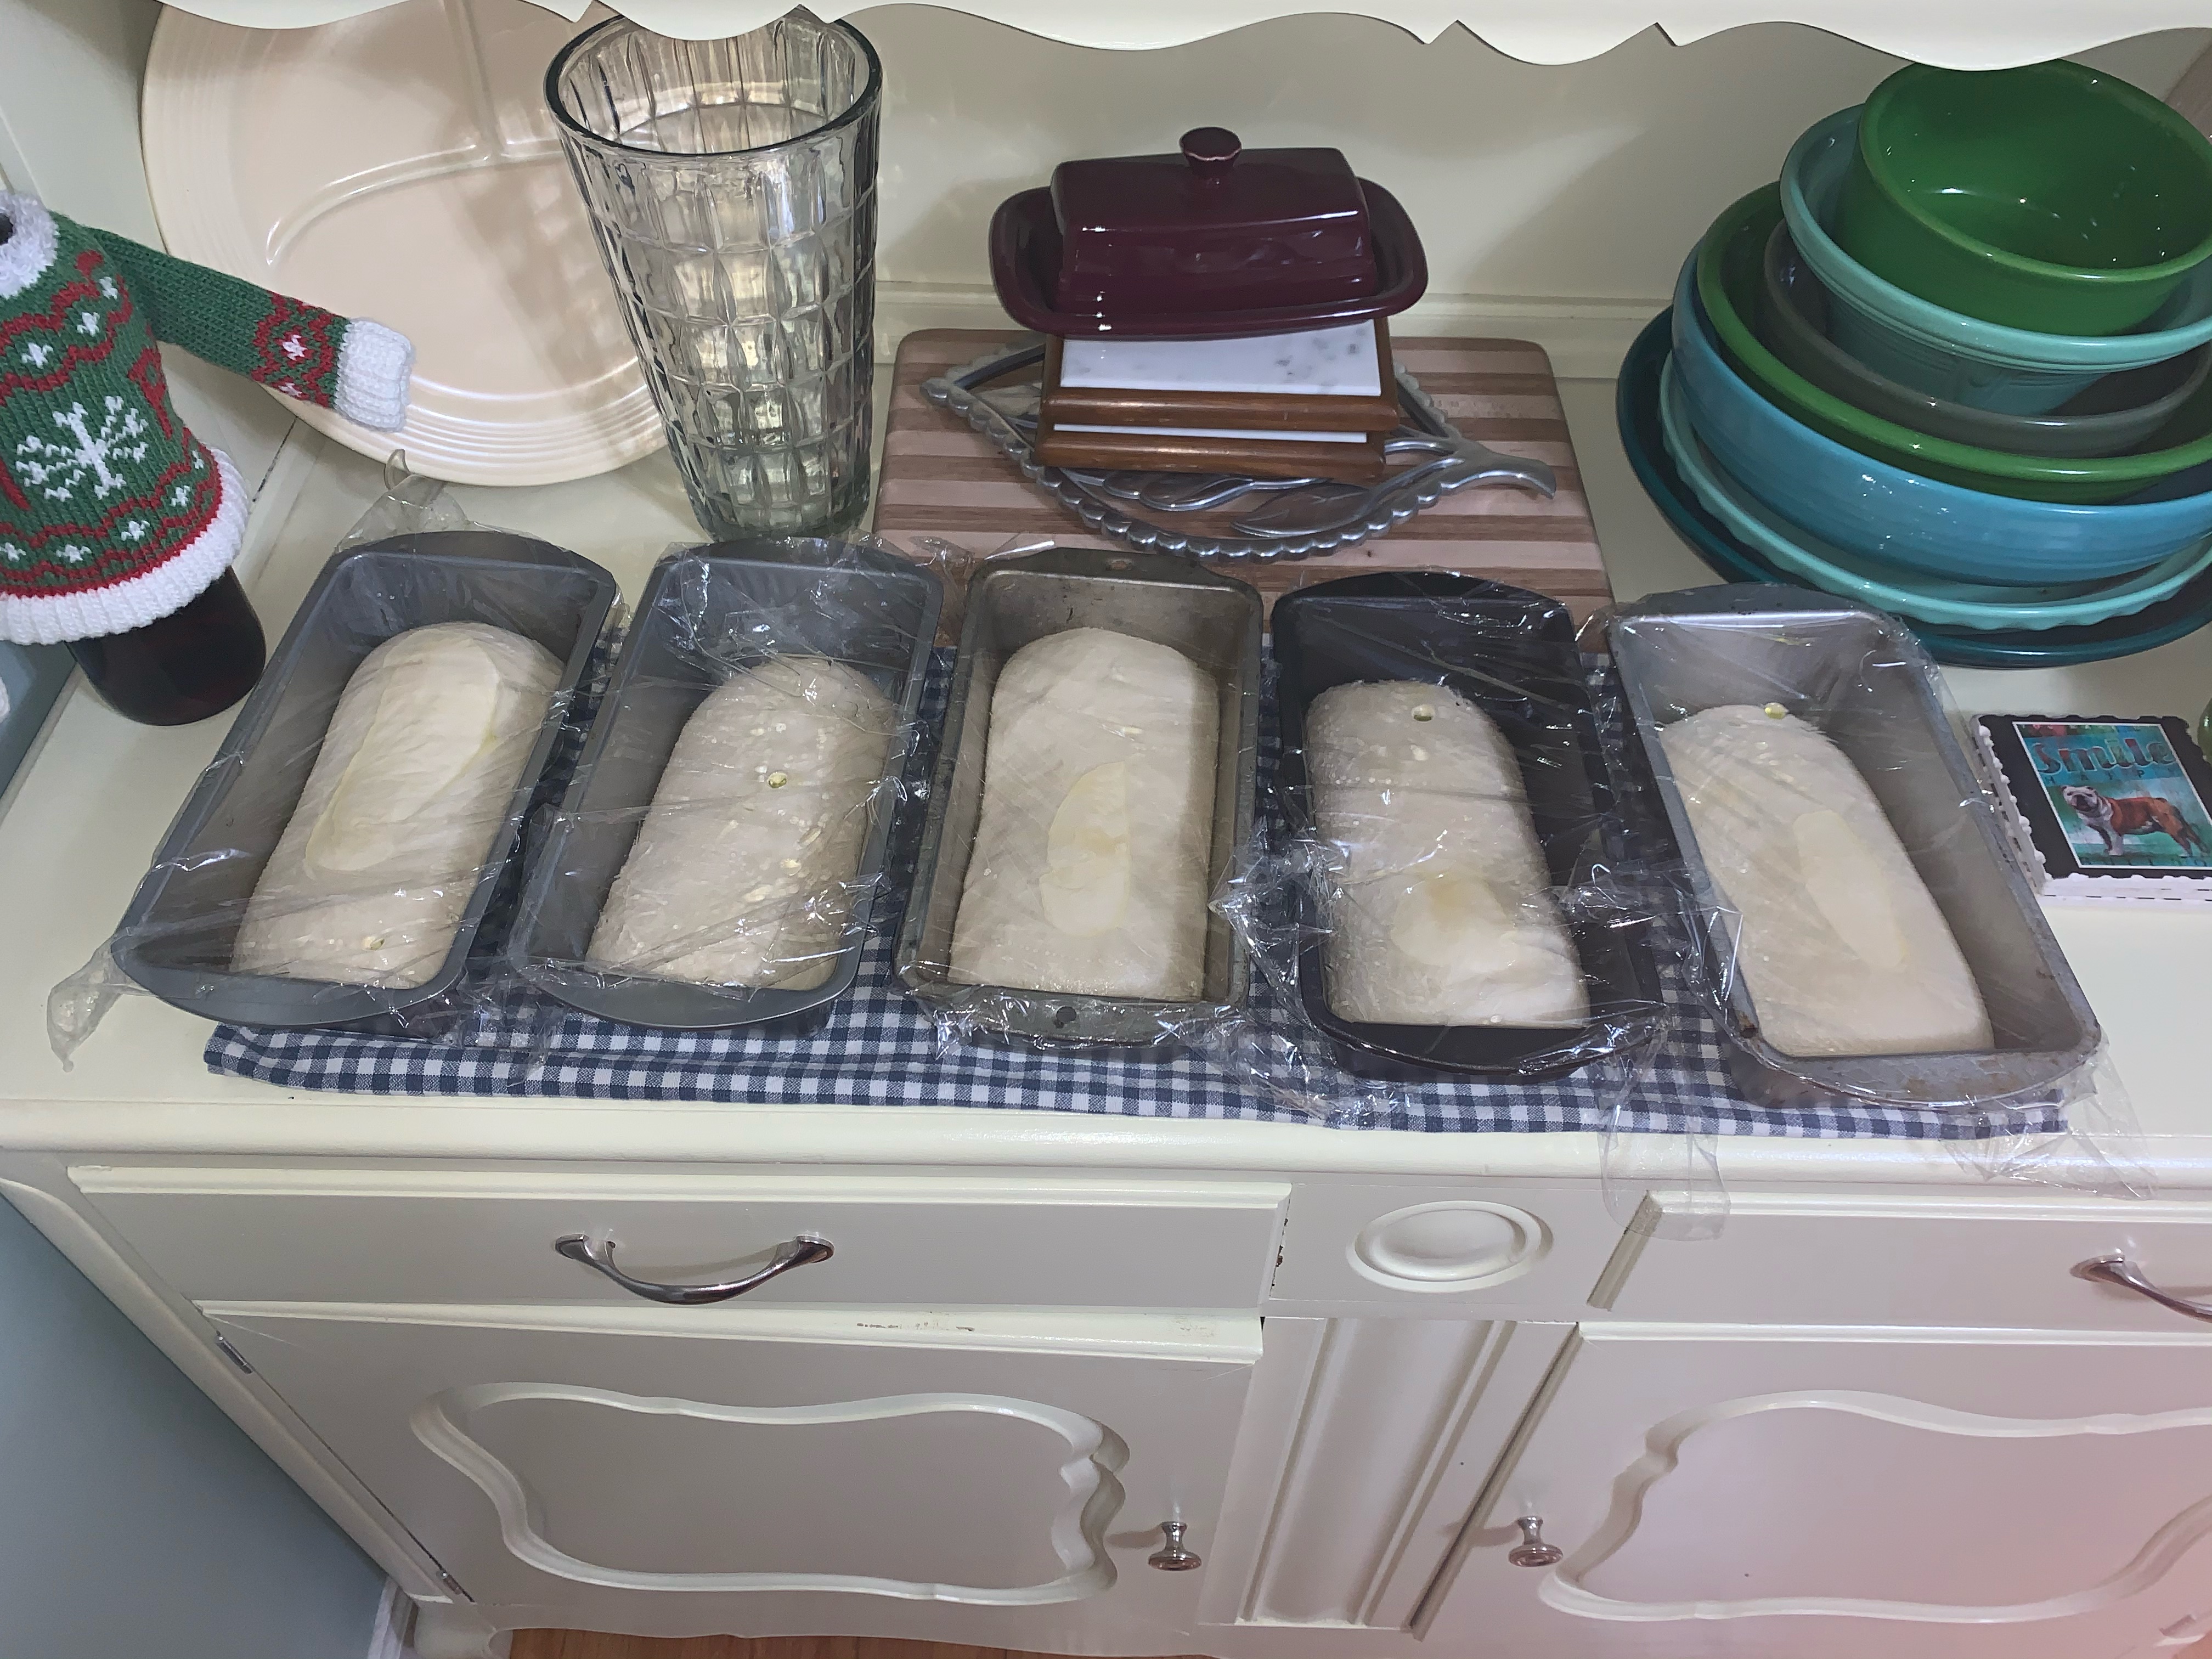 5 loaves of bread rising